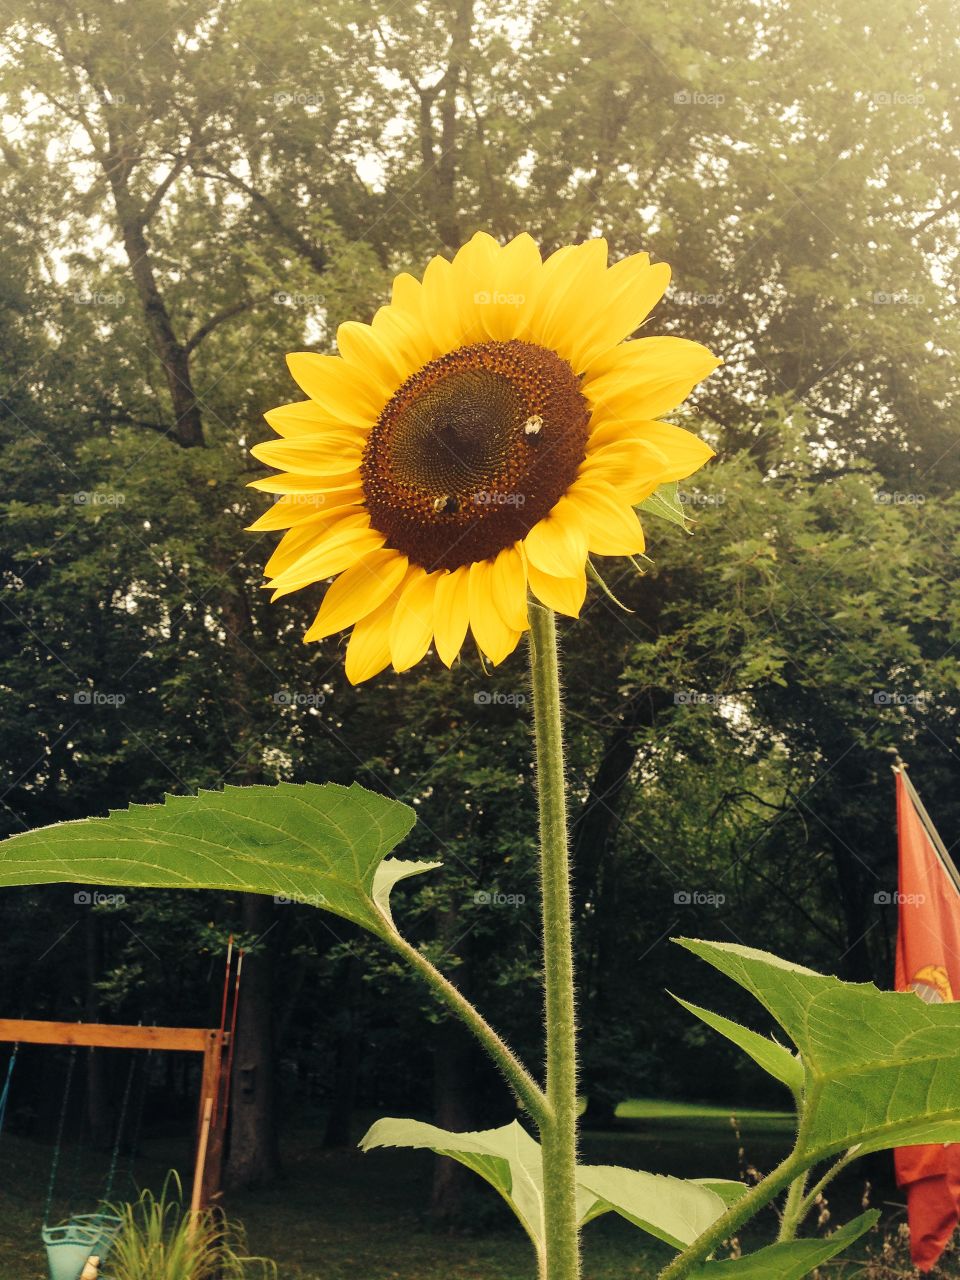 Sunflower. Sunflower in the garden with two bumblebees